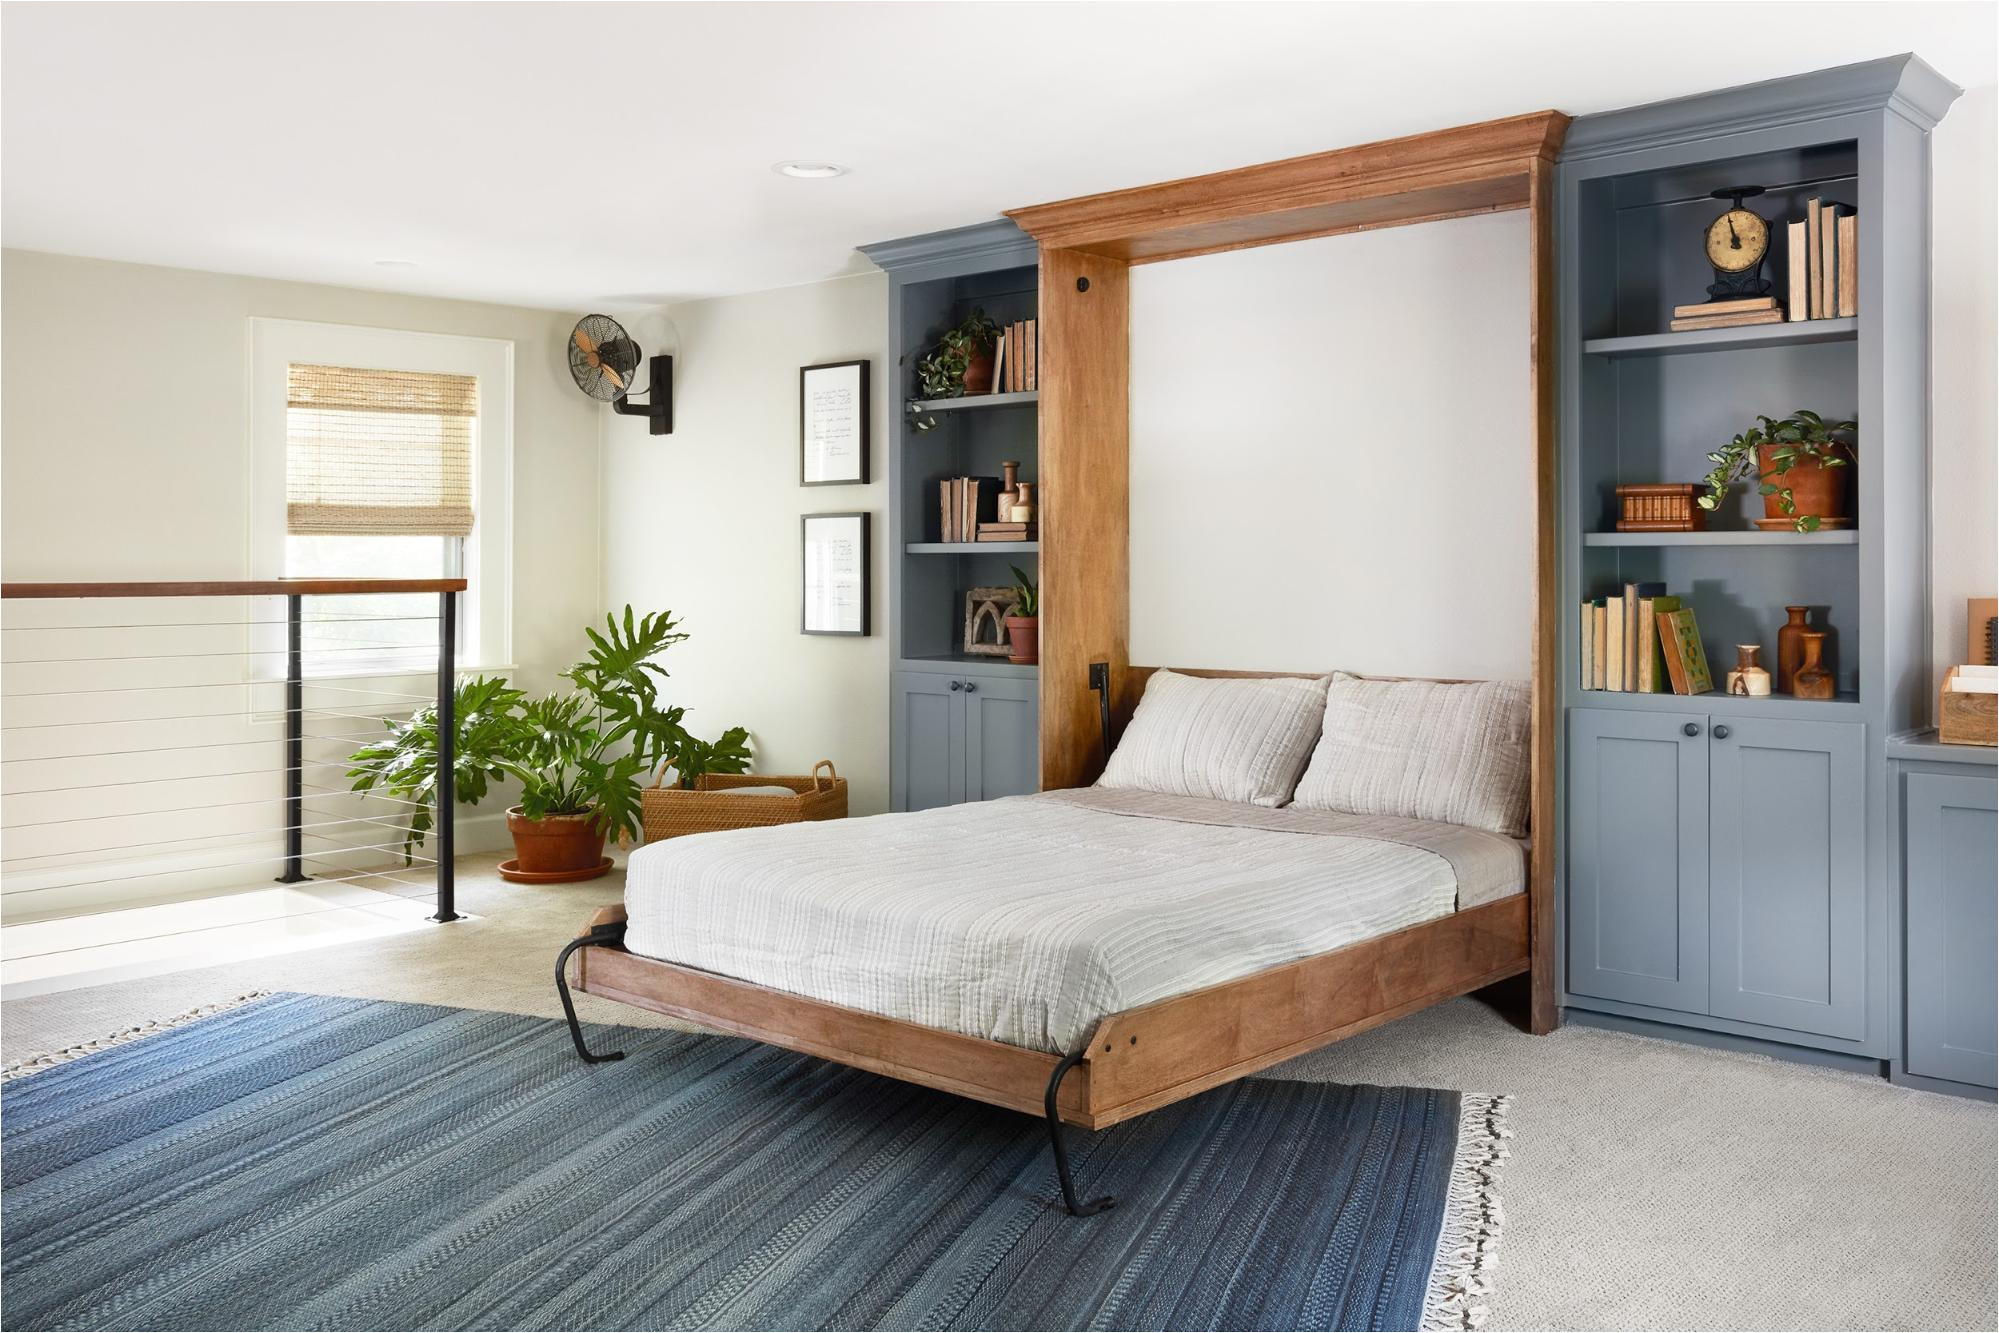 our solution for converting this space to a guest room was to incorporate a murphy bed since this room is in an upstairs loft style area of the home